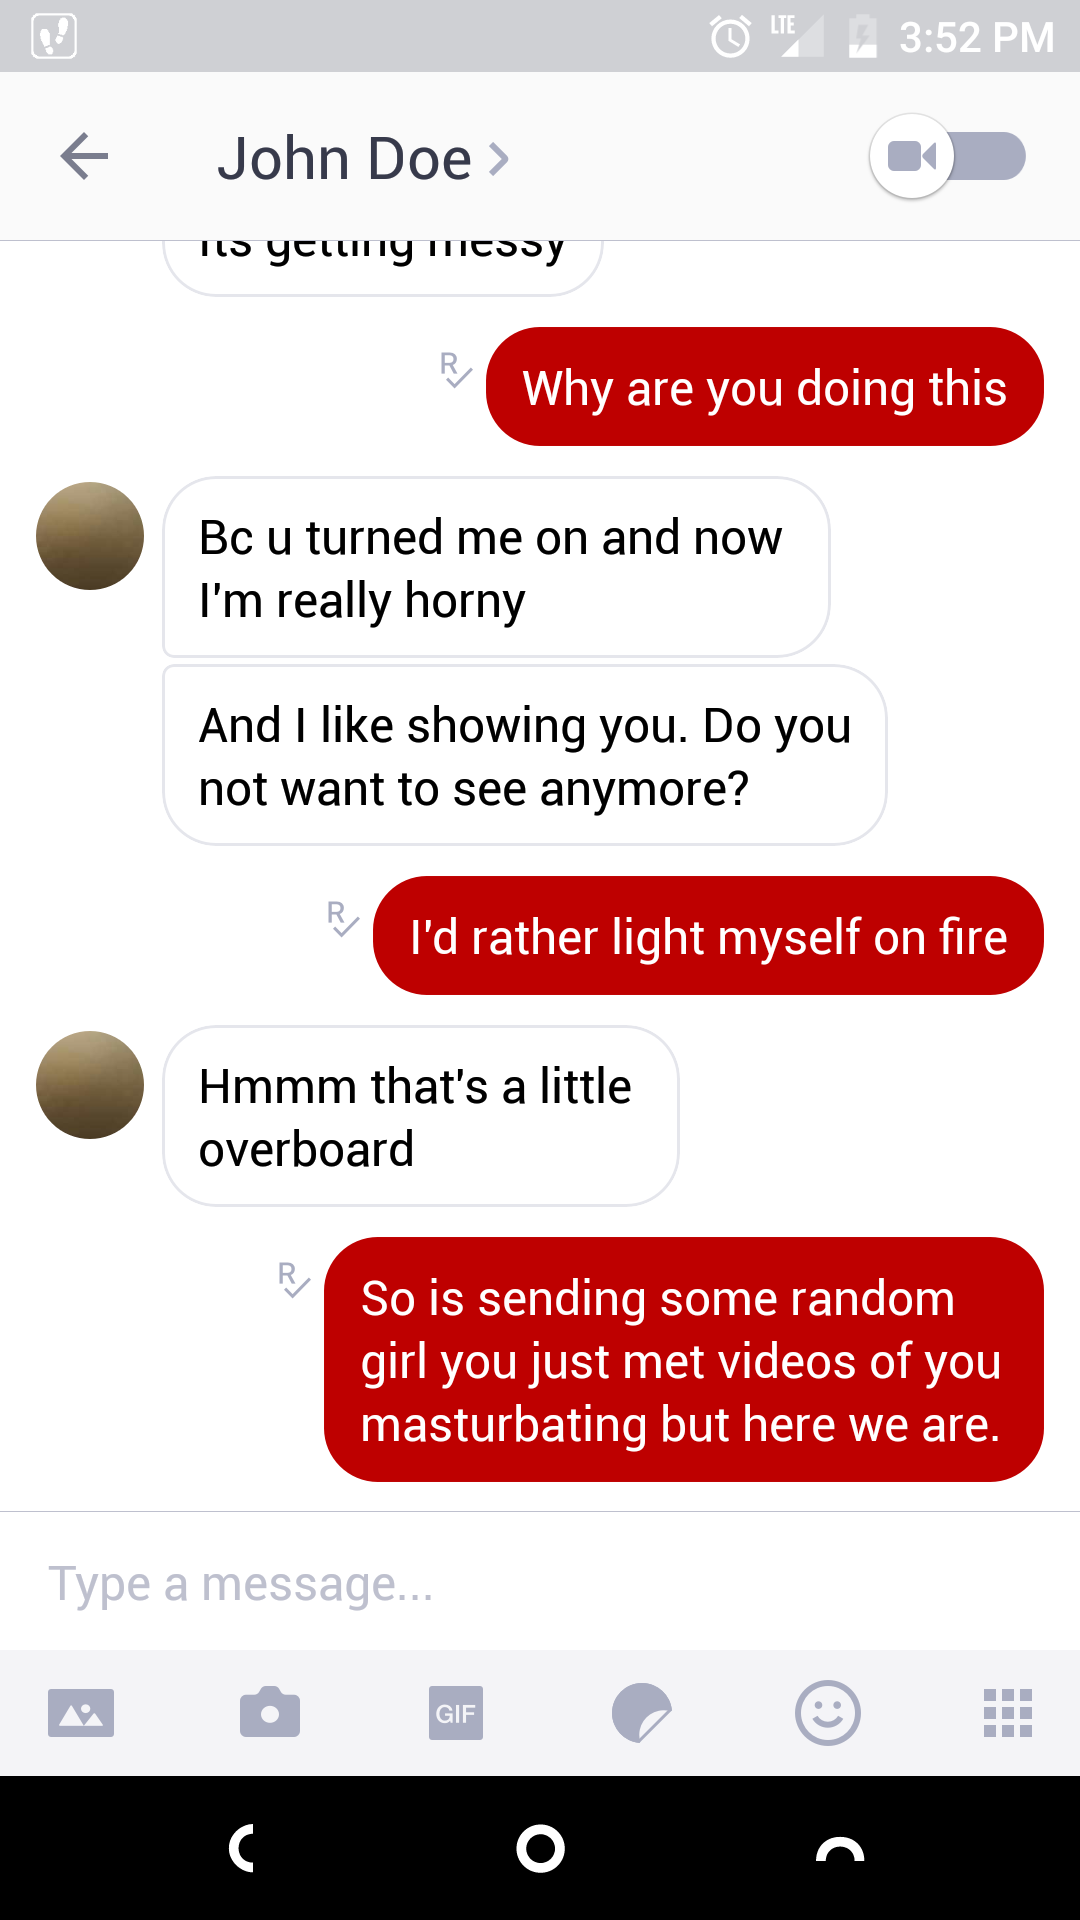 When does flirting become sexual harassment?